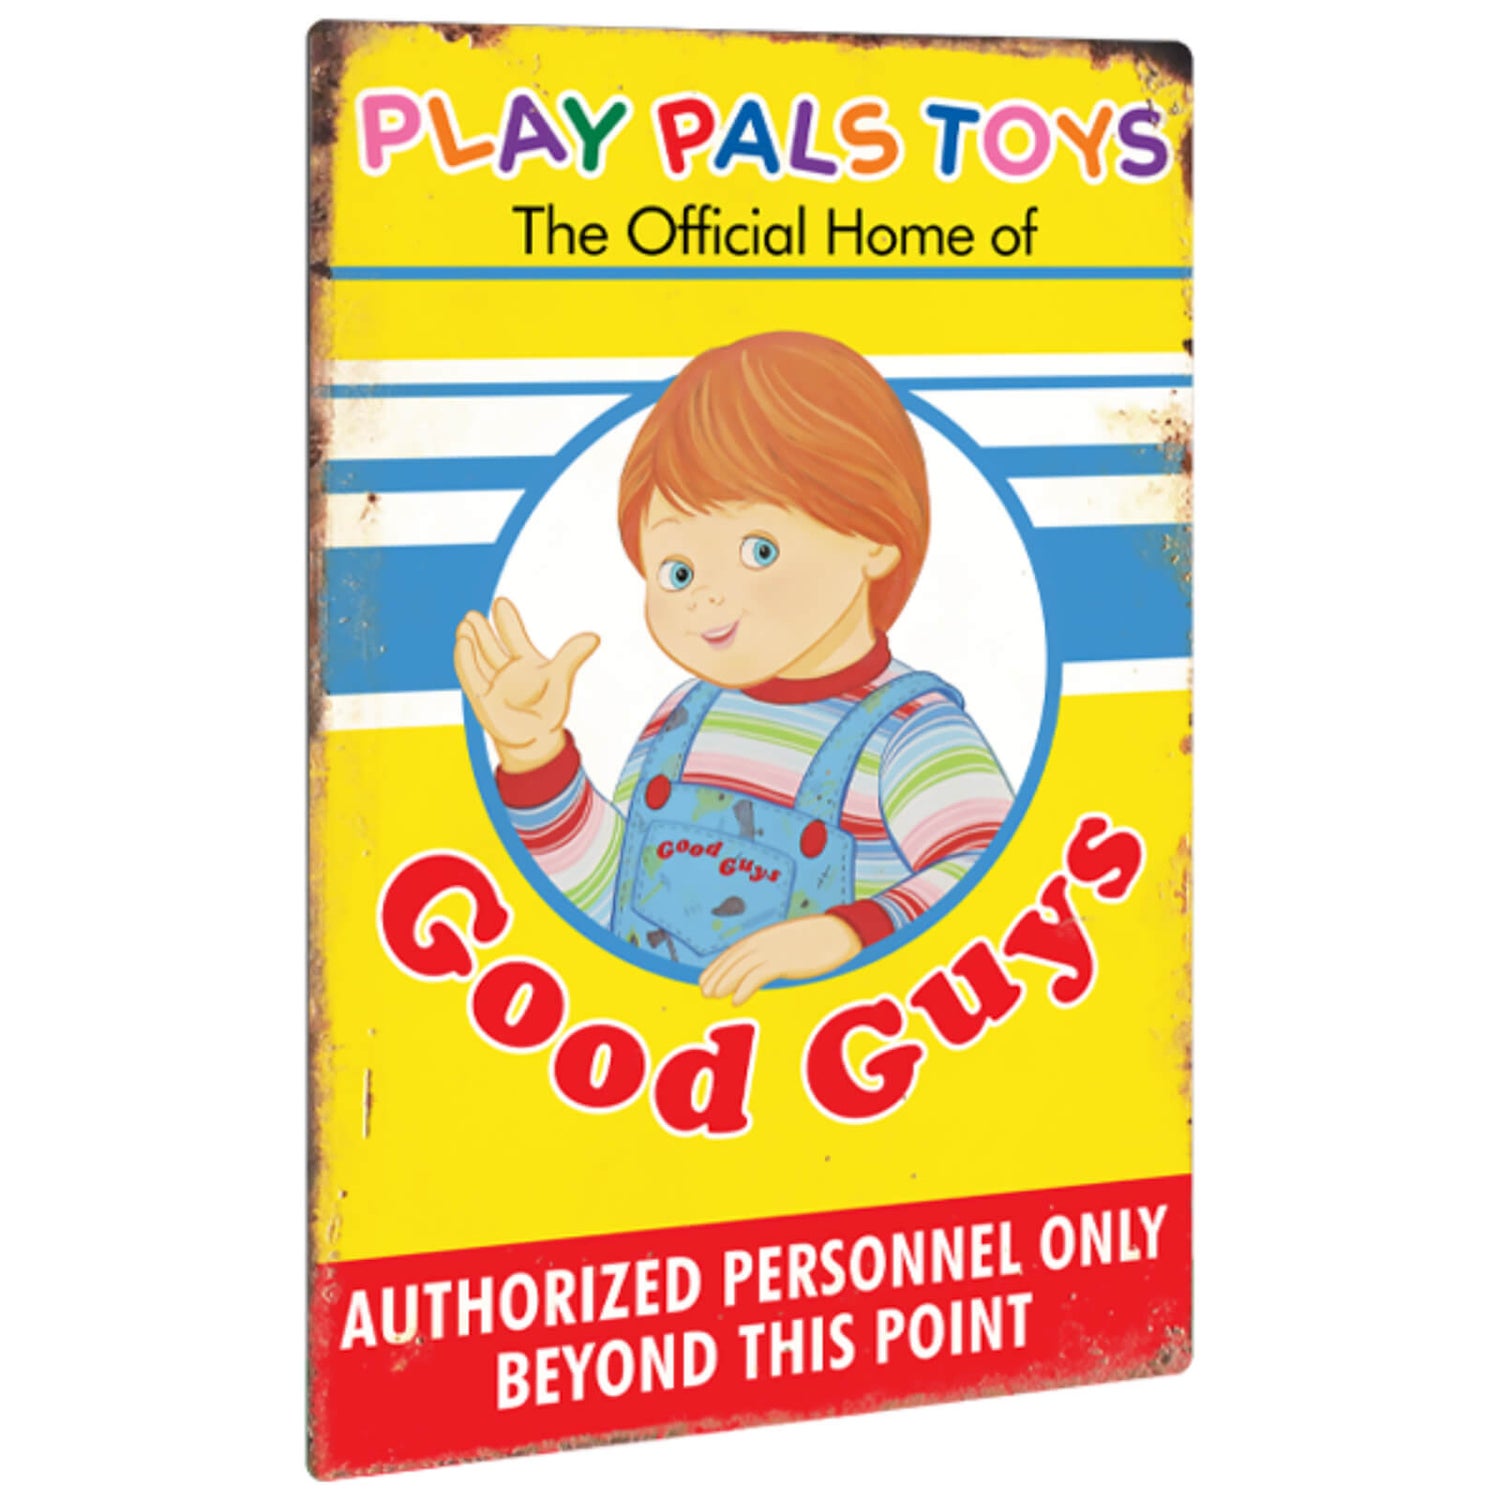 Trick or Treat Studios Child's Play 2 Good Guys Play Pals Toys Metal Sign